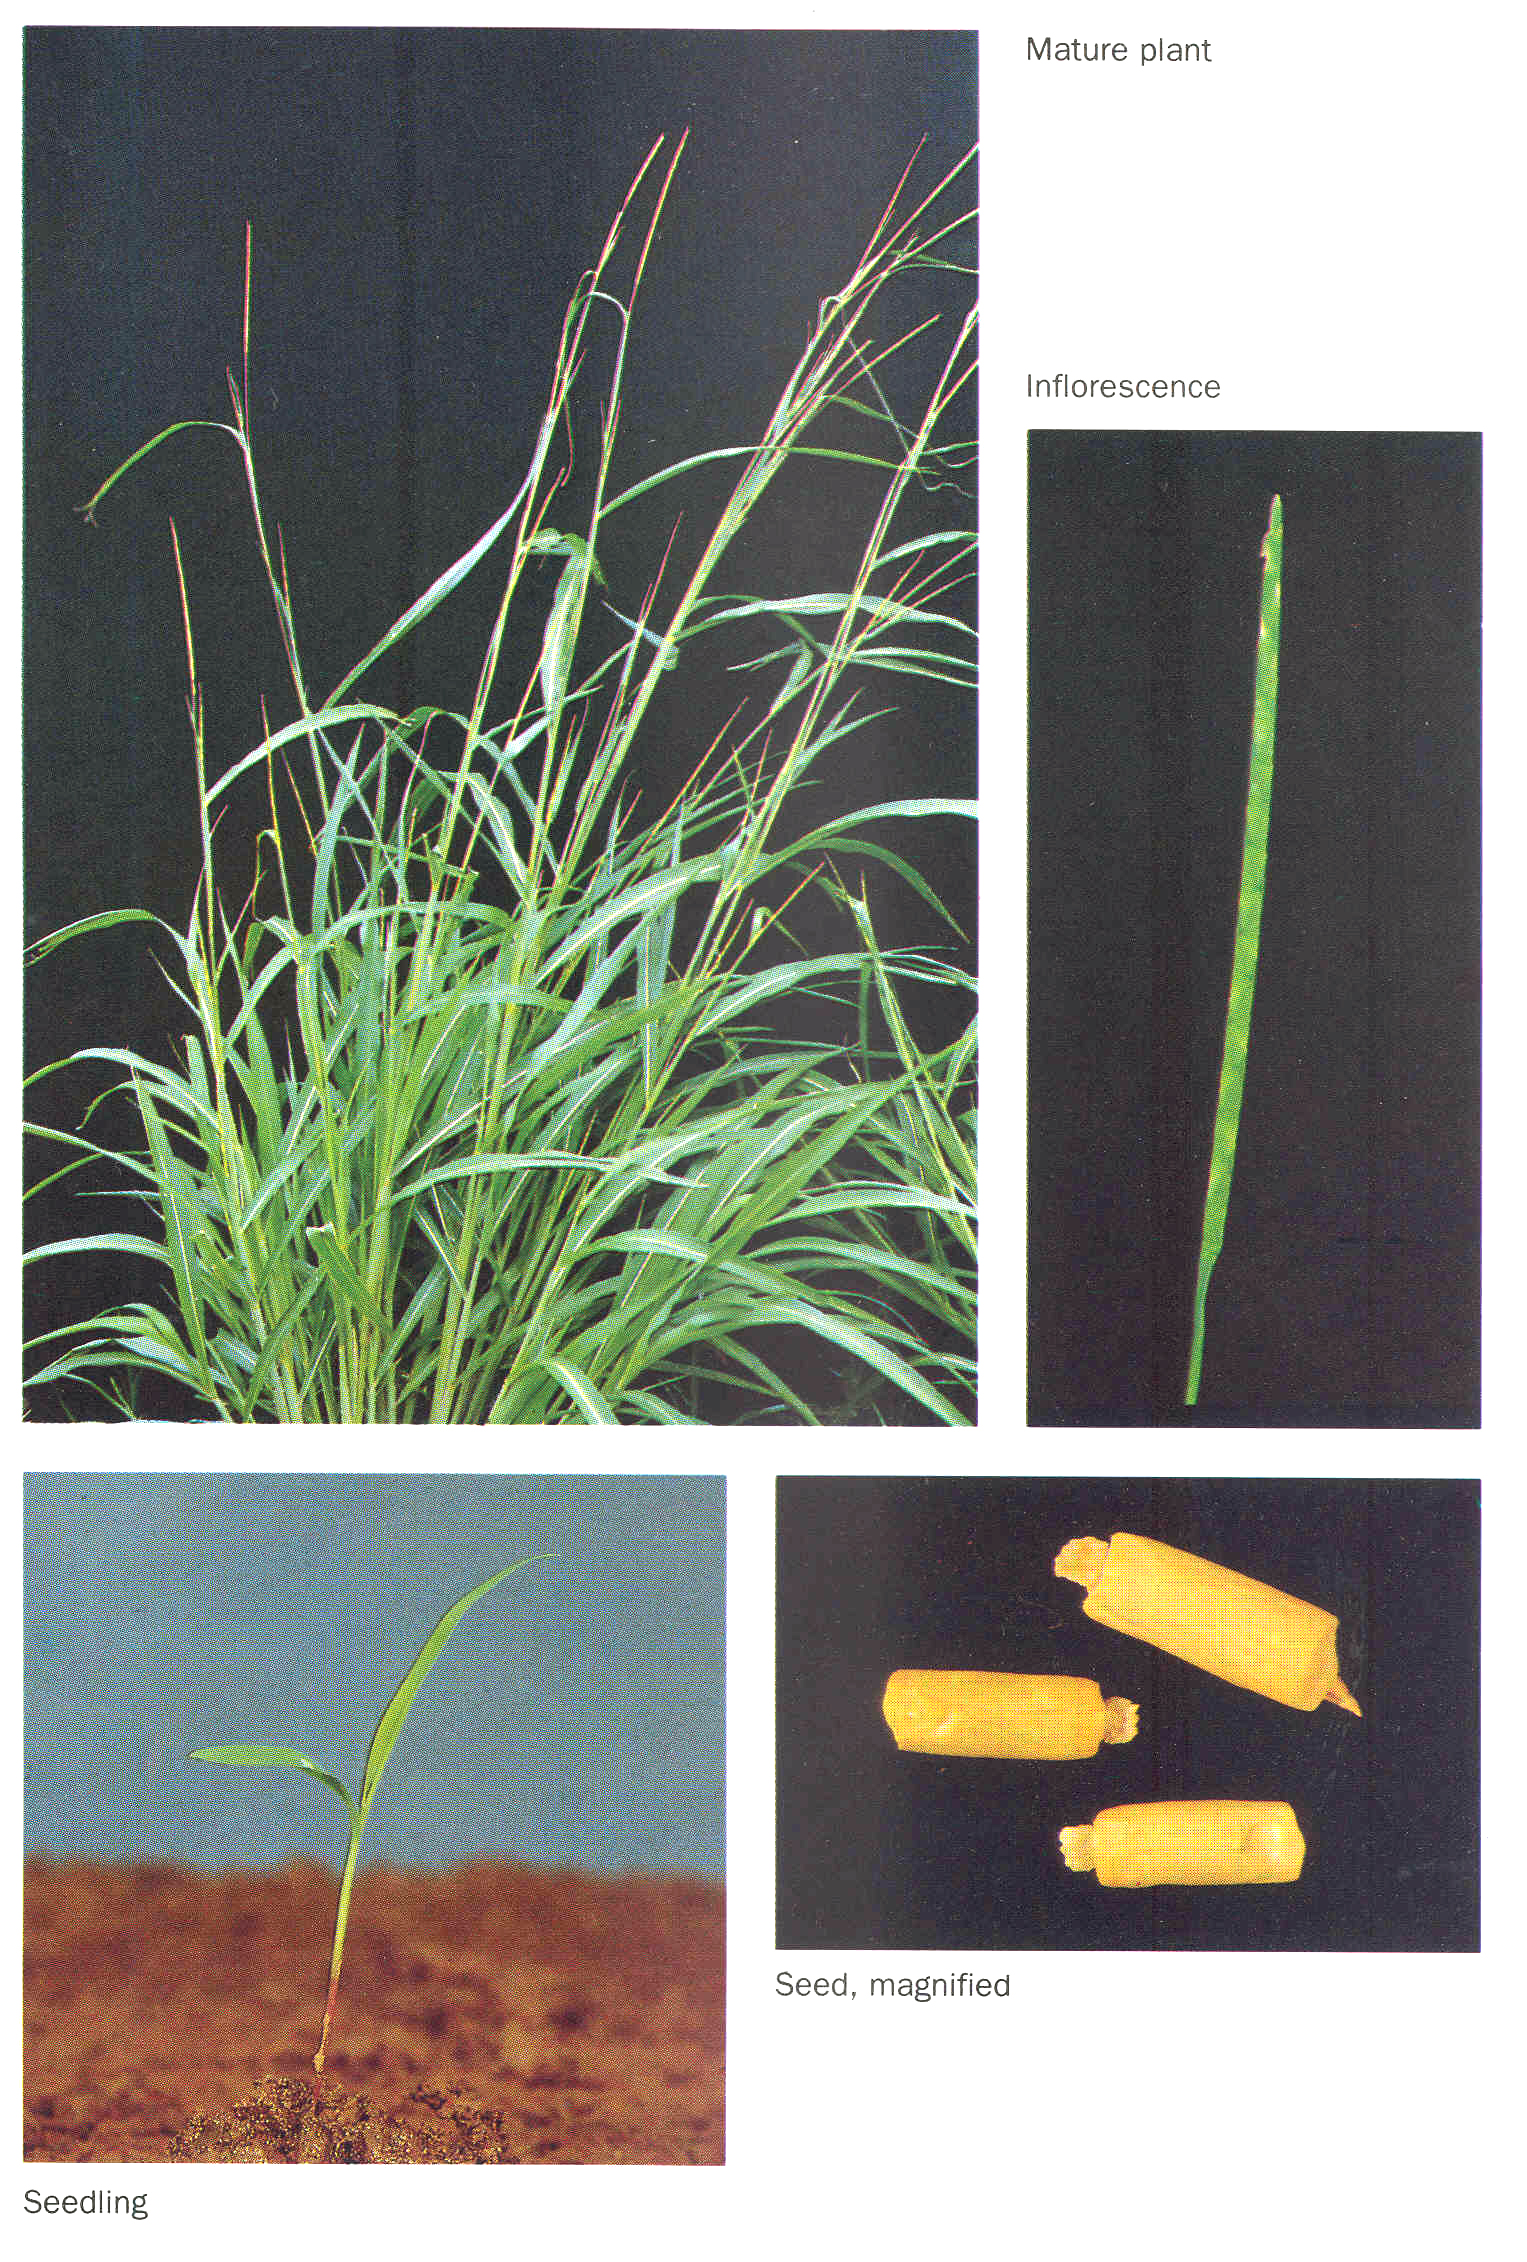 A compilation of four photographs of itchgrass. The top left image is of a full above-ground clump of grass. The top right image is of a singular inflorescence. The bottom left image is of a seedling. The bottom right image is of three seed dispersal units (seed-containing structures).